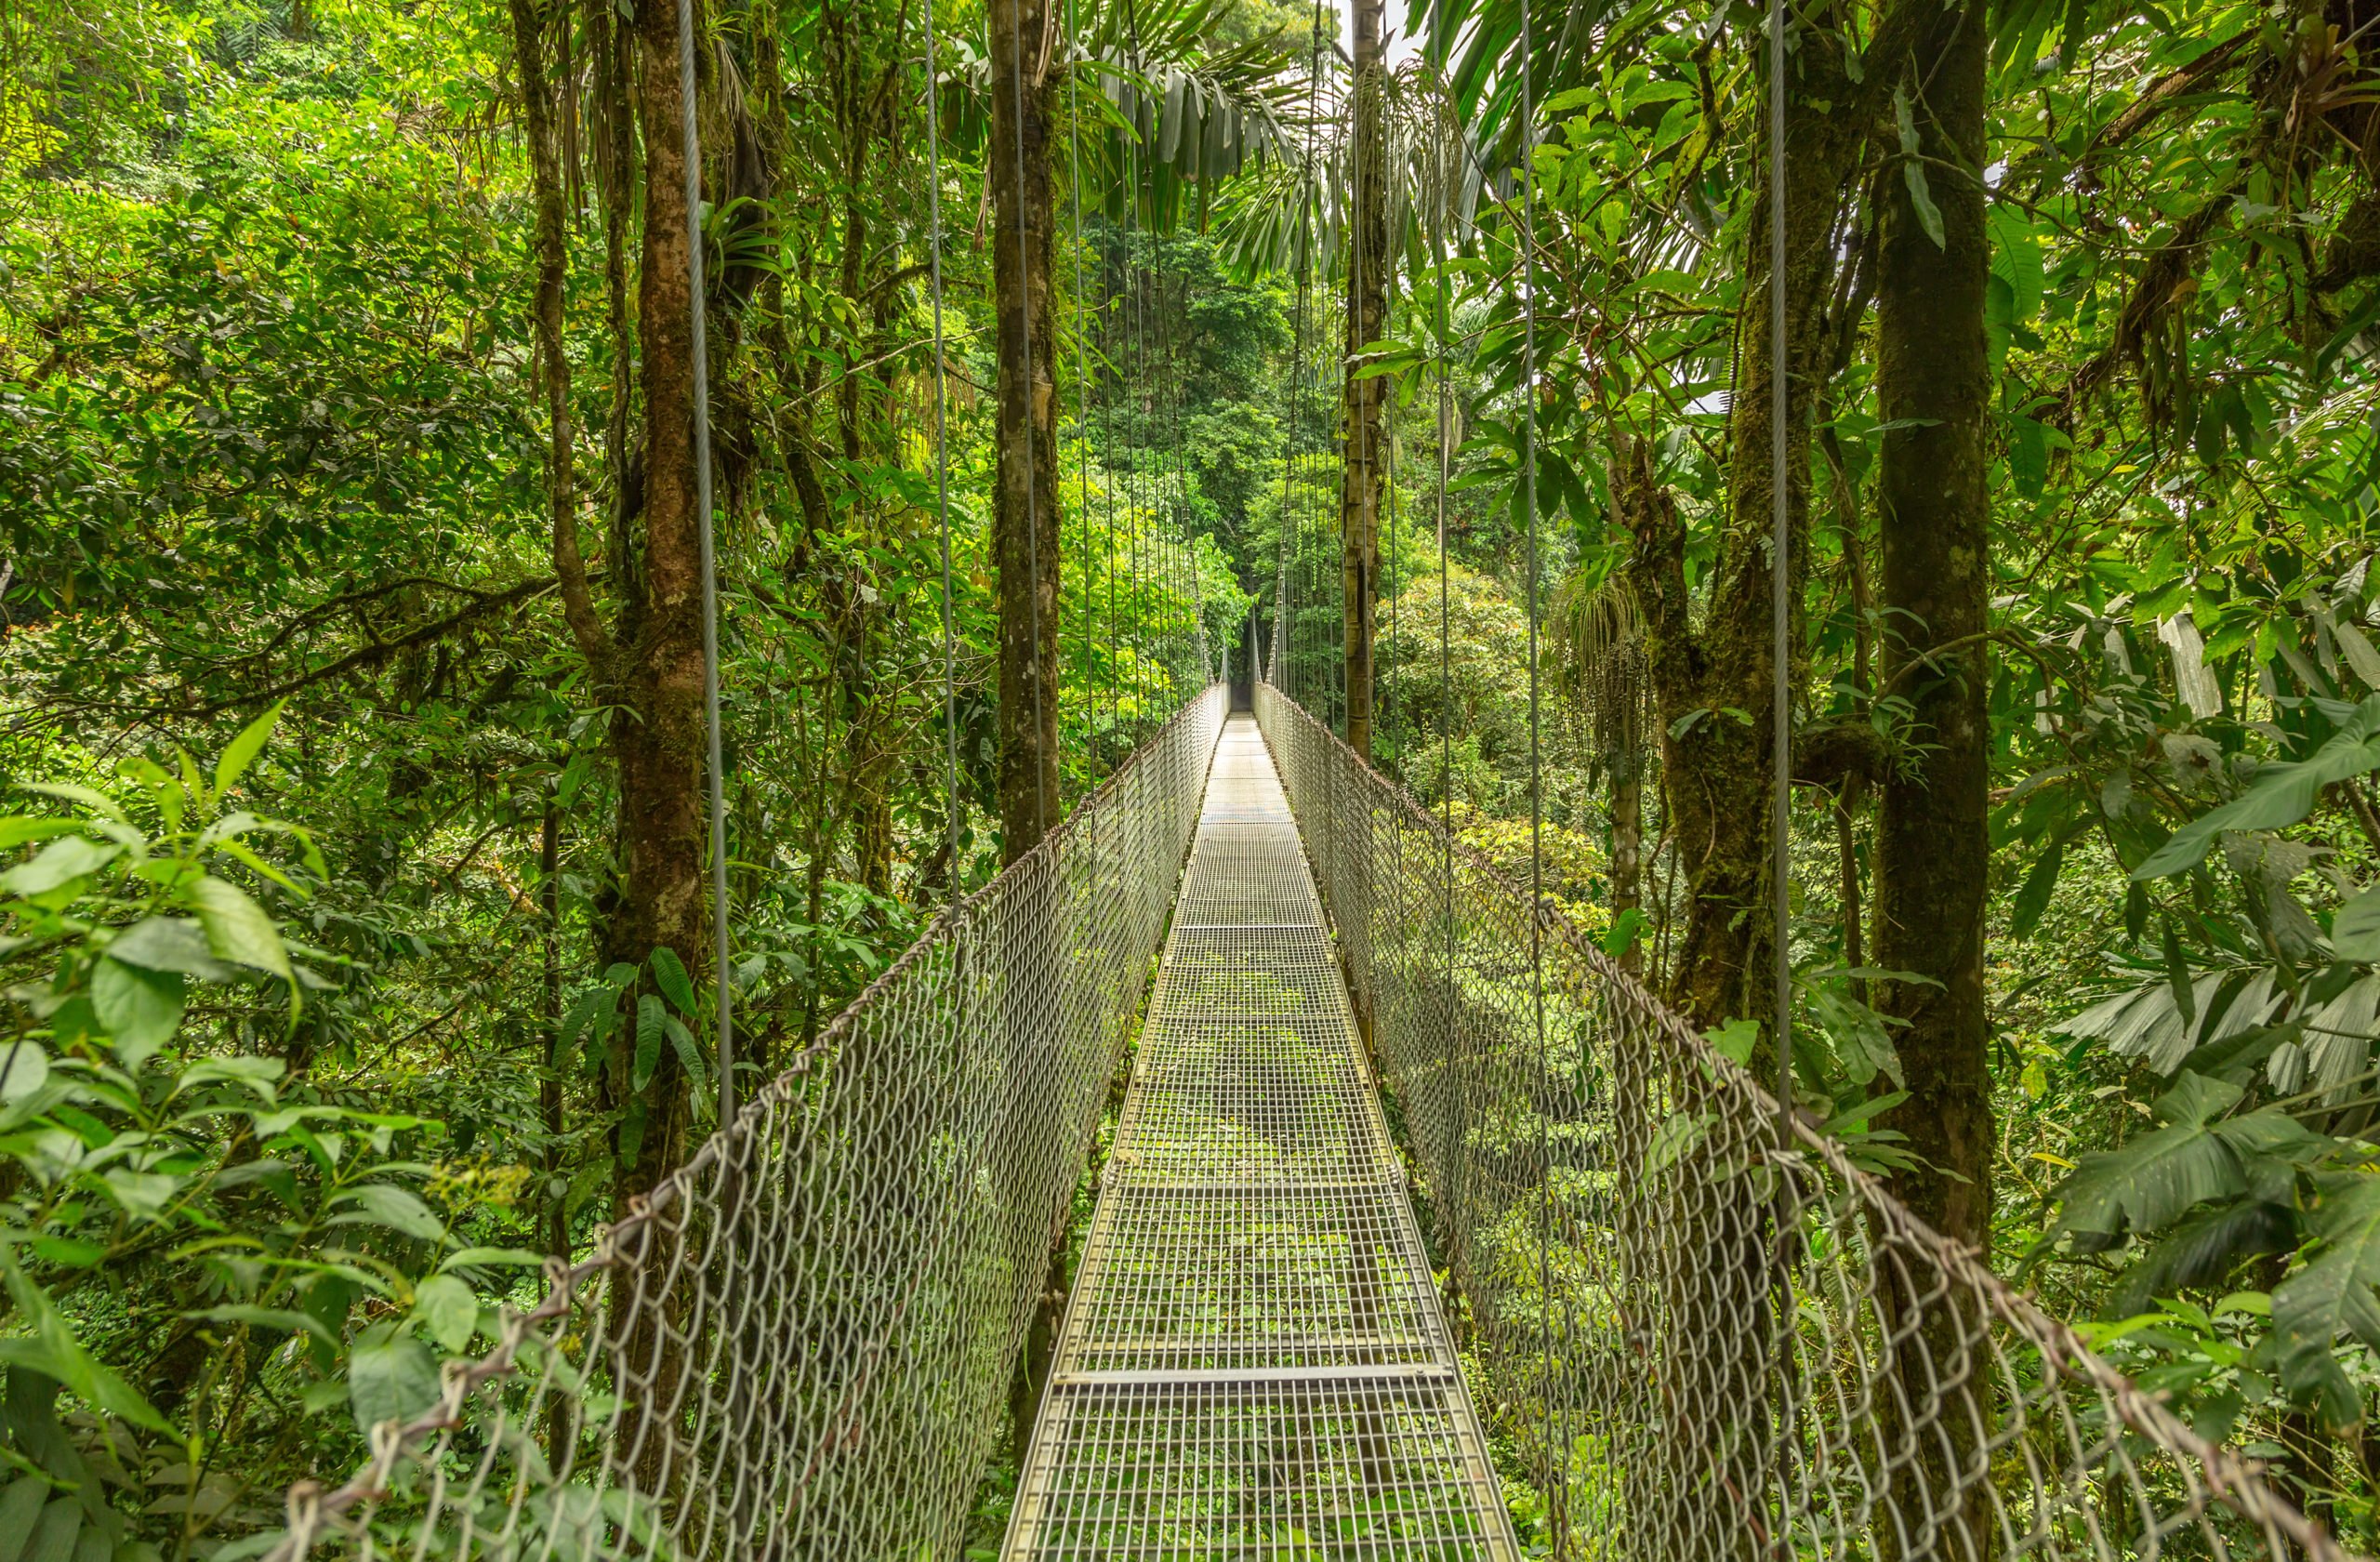 Enjoy Some Adventure Activities In The Arenal Forest On The On The Tortuguero, Arenal & Manuel Antonio 10 Day Adventure Package Tour